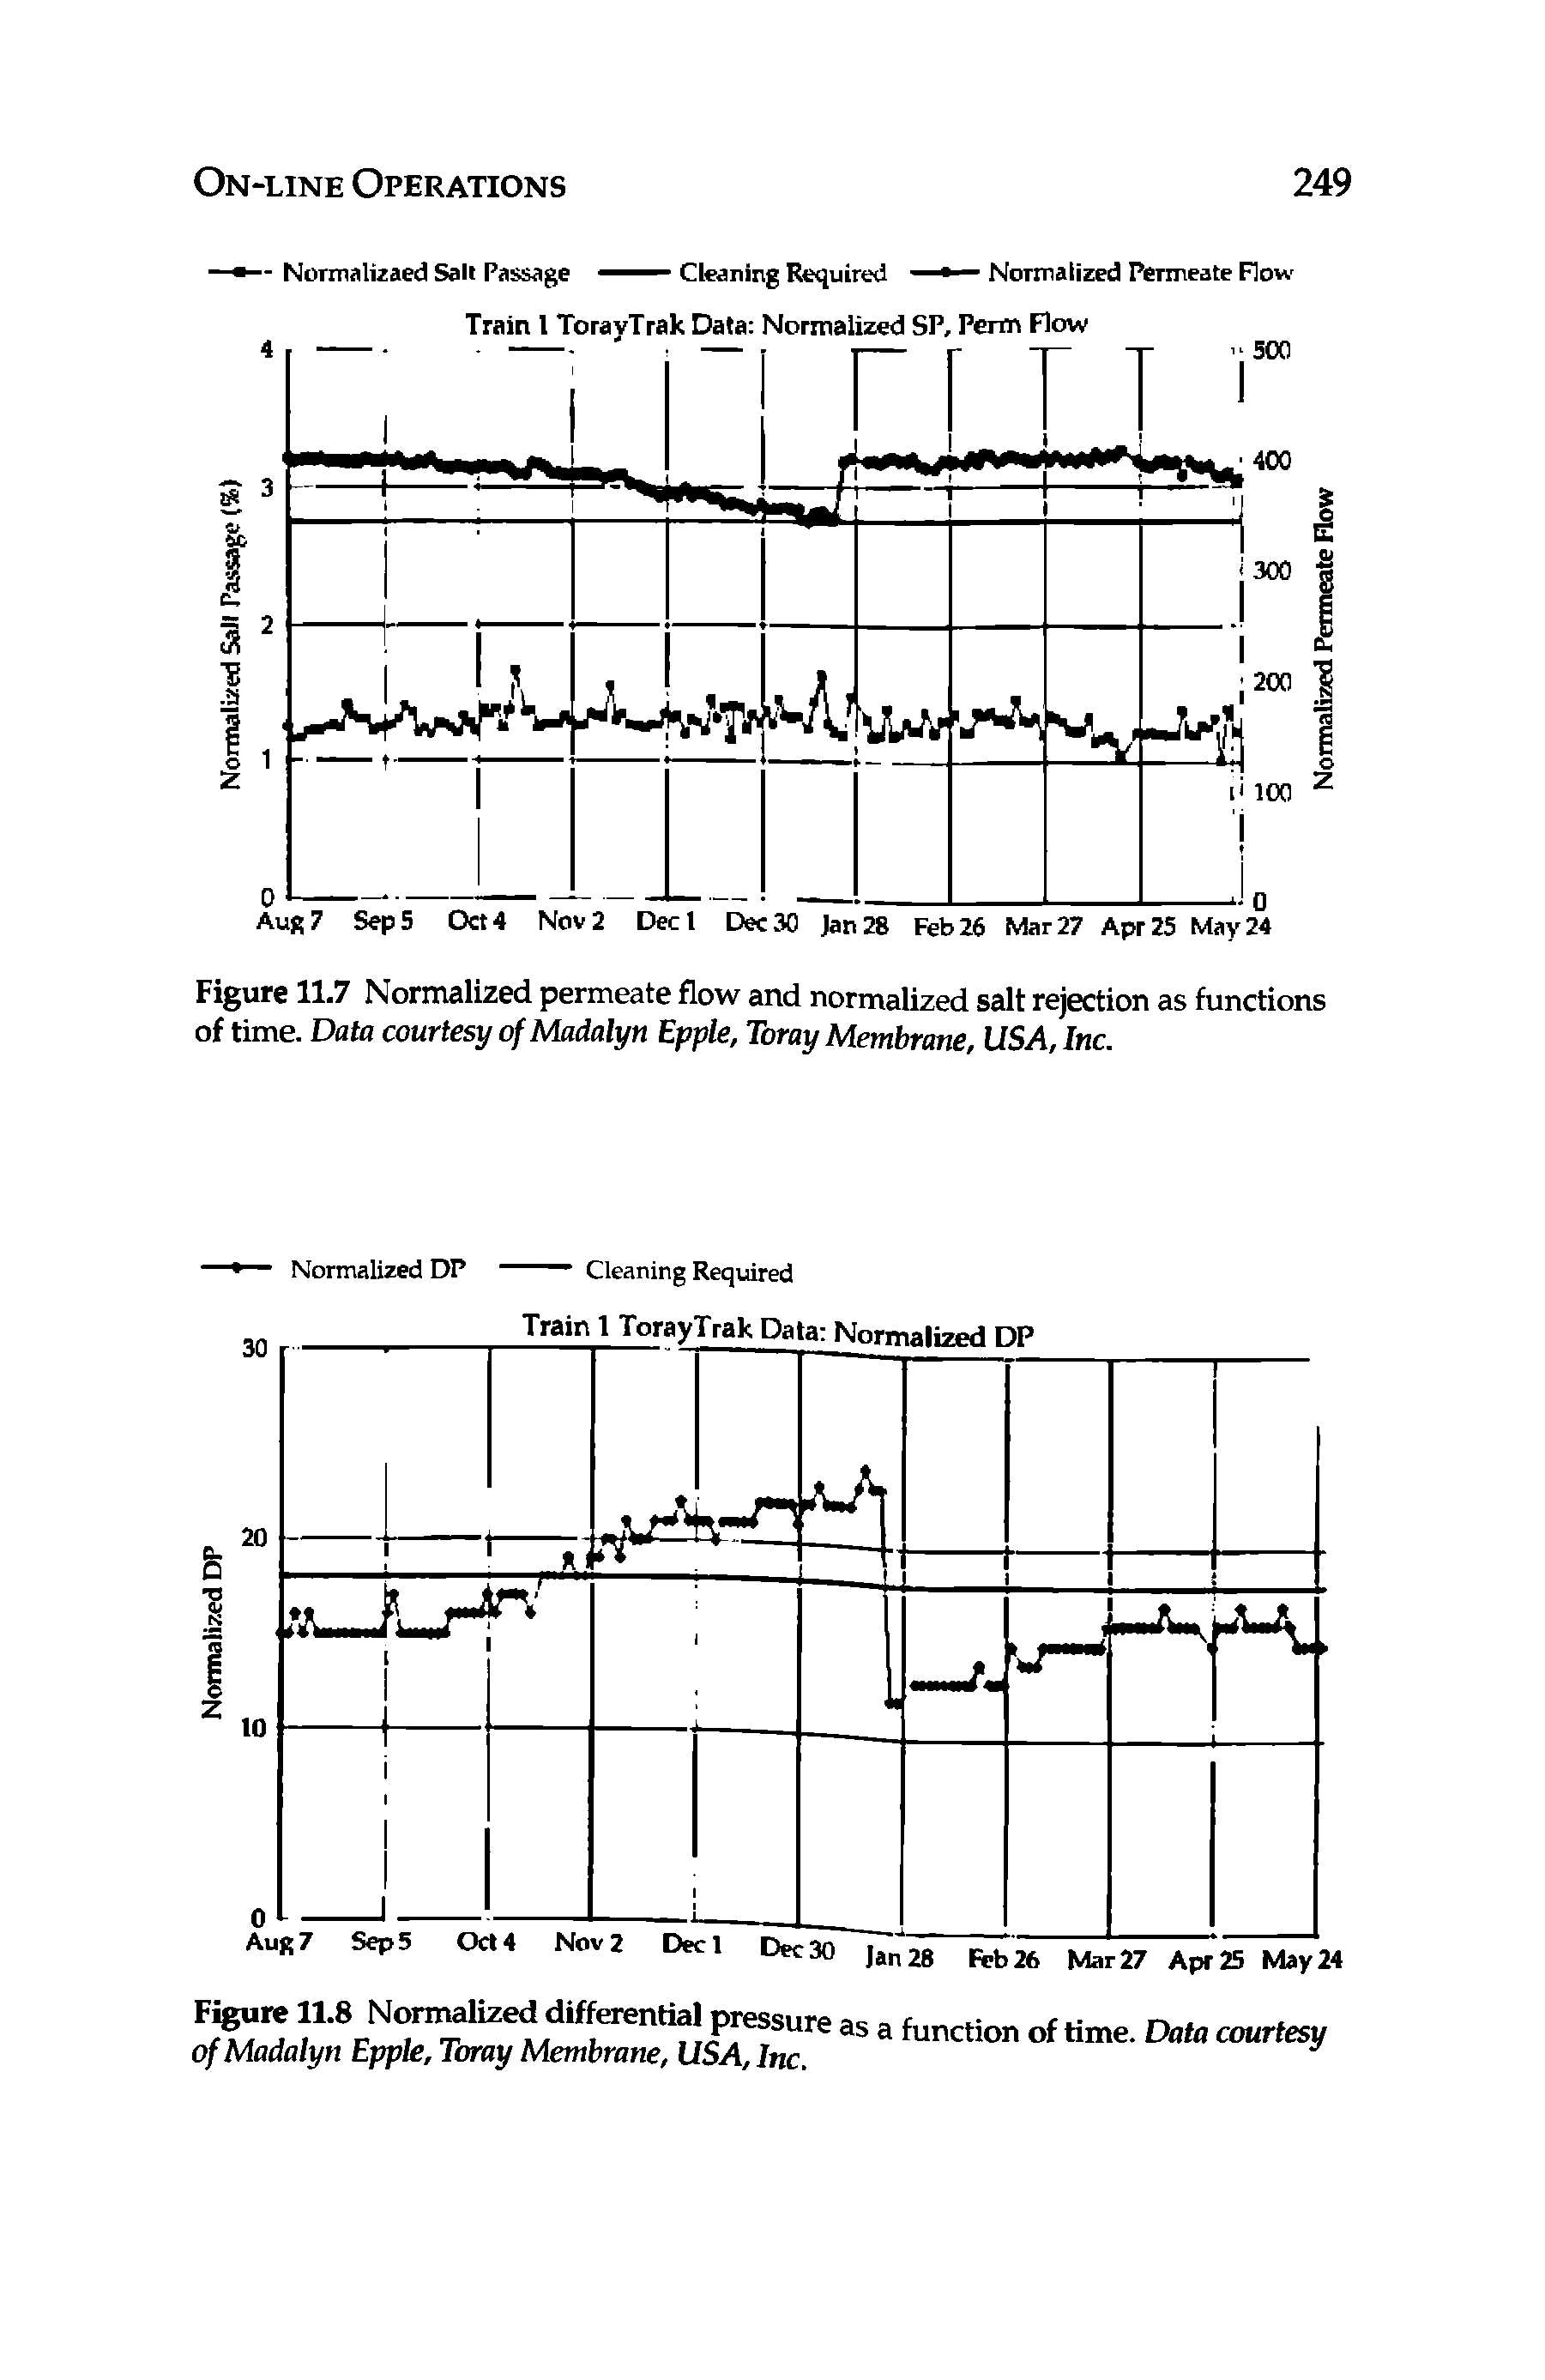 Figure 11.7 Normalized permeate flow and normalized salt rejection as functions of time. Data courtesy of Madalyn Epple, Toray Membrane, USA, Inc.